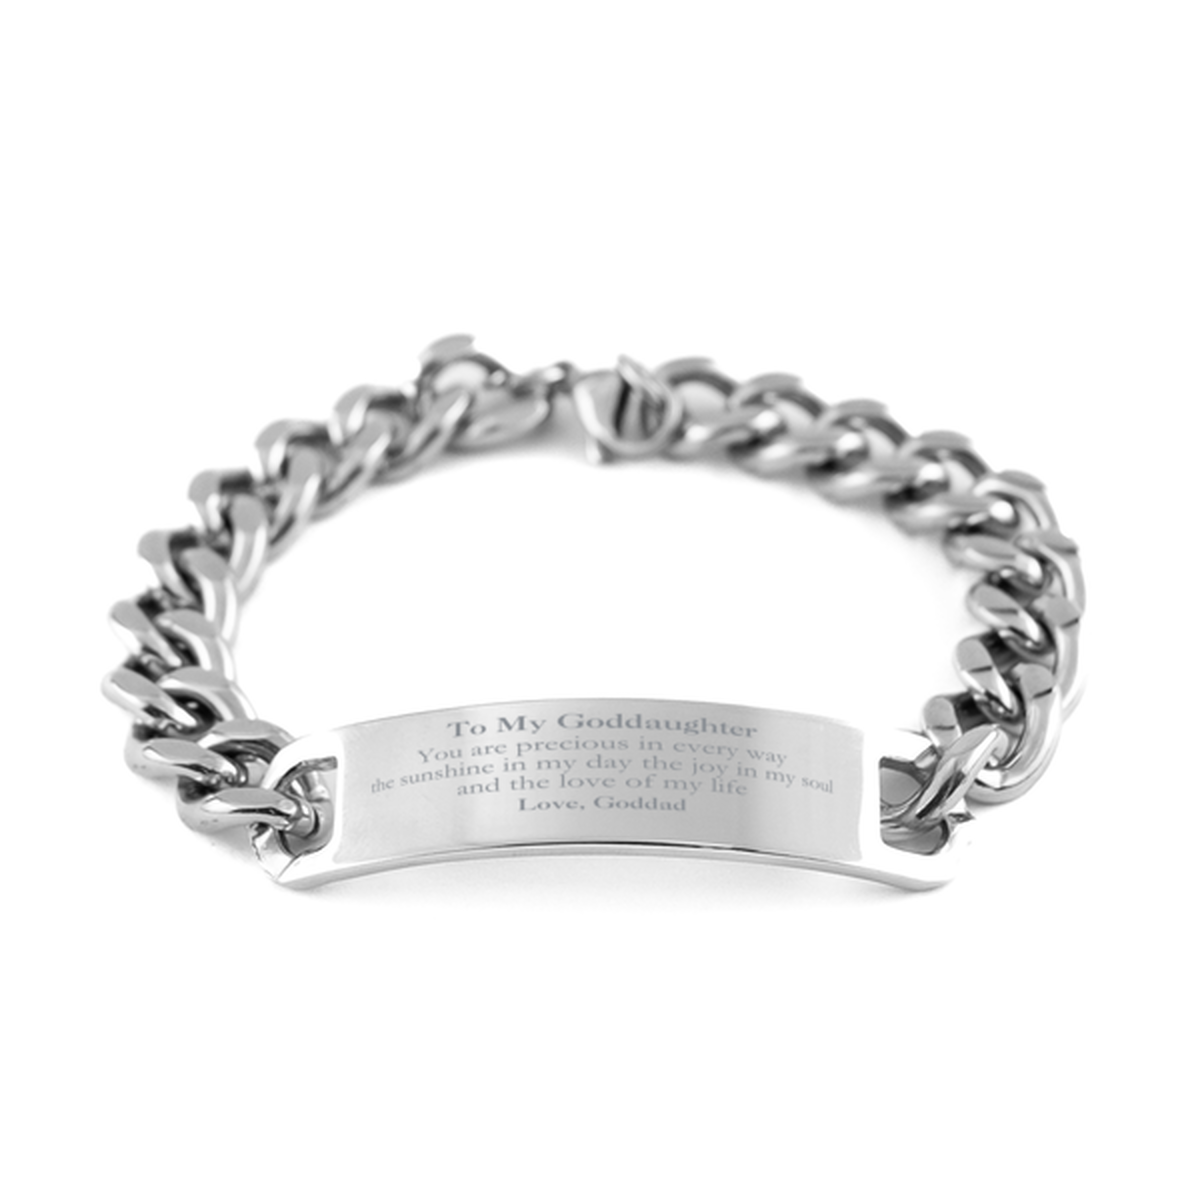 Graduation Gifts for Goddaughter Cuban Chain Stainless Steel Bracelet Present from Goddad, Christmas Goddaughter Birthday Gifts Goddaughter You are precious in every way the sunshine in my day. Love, Goddad